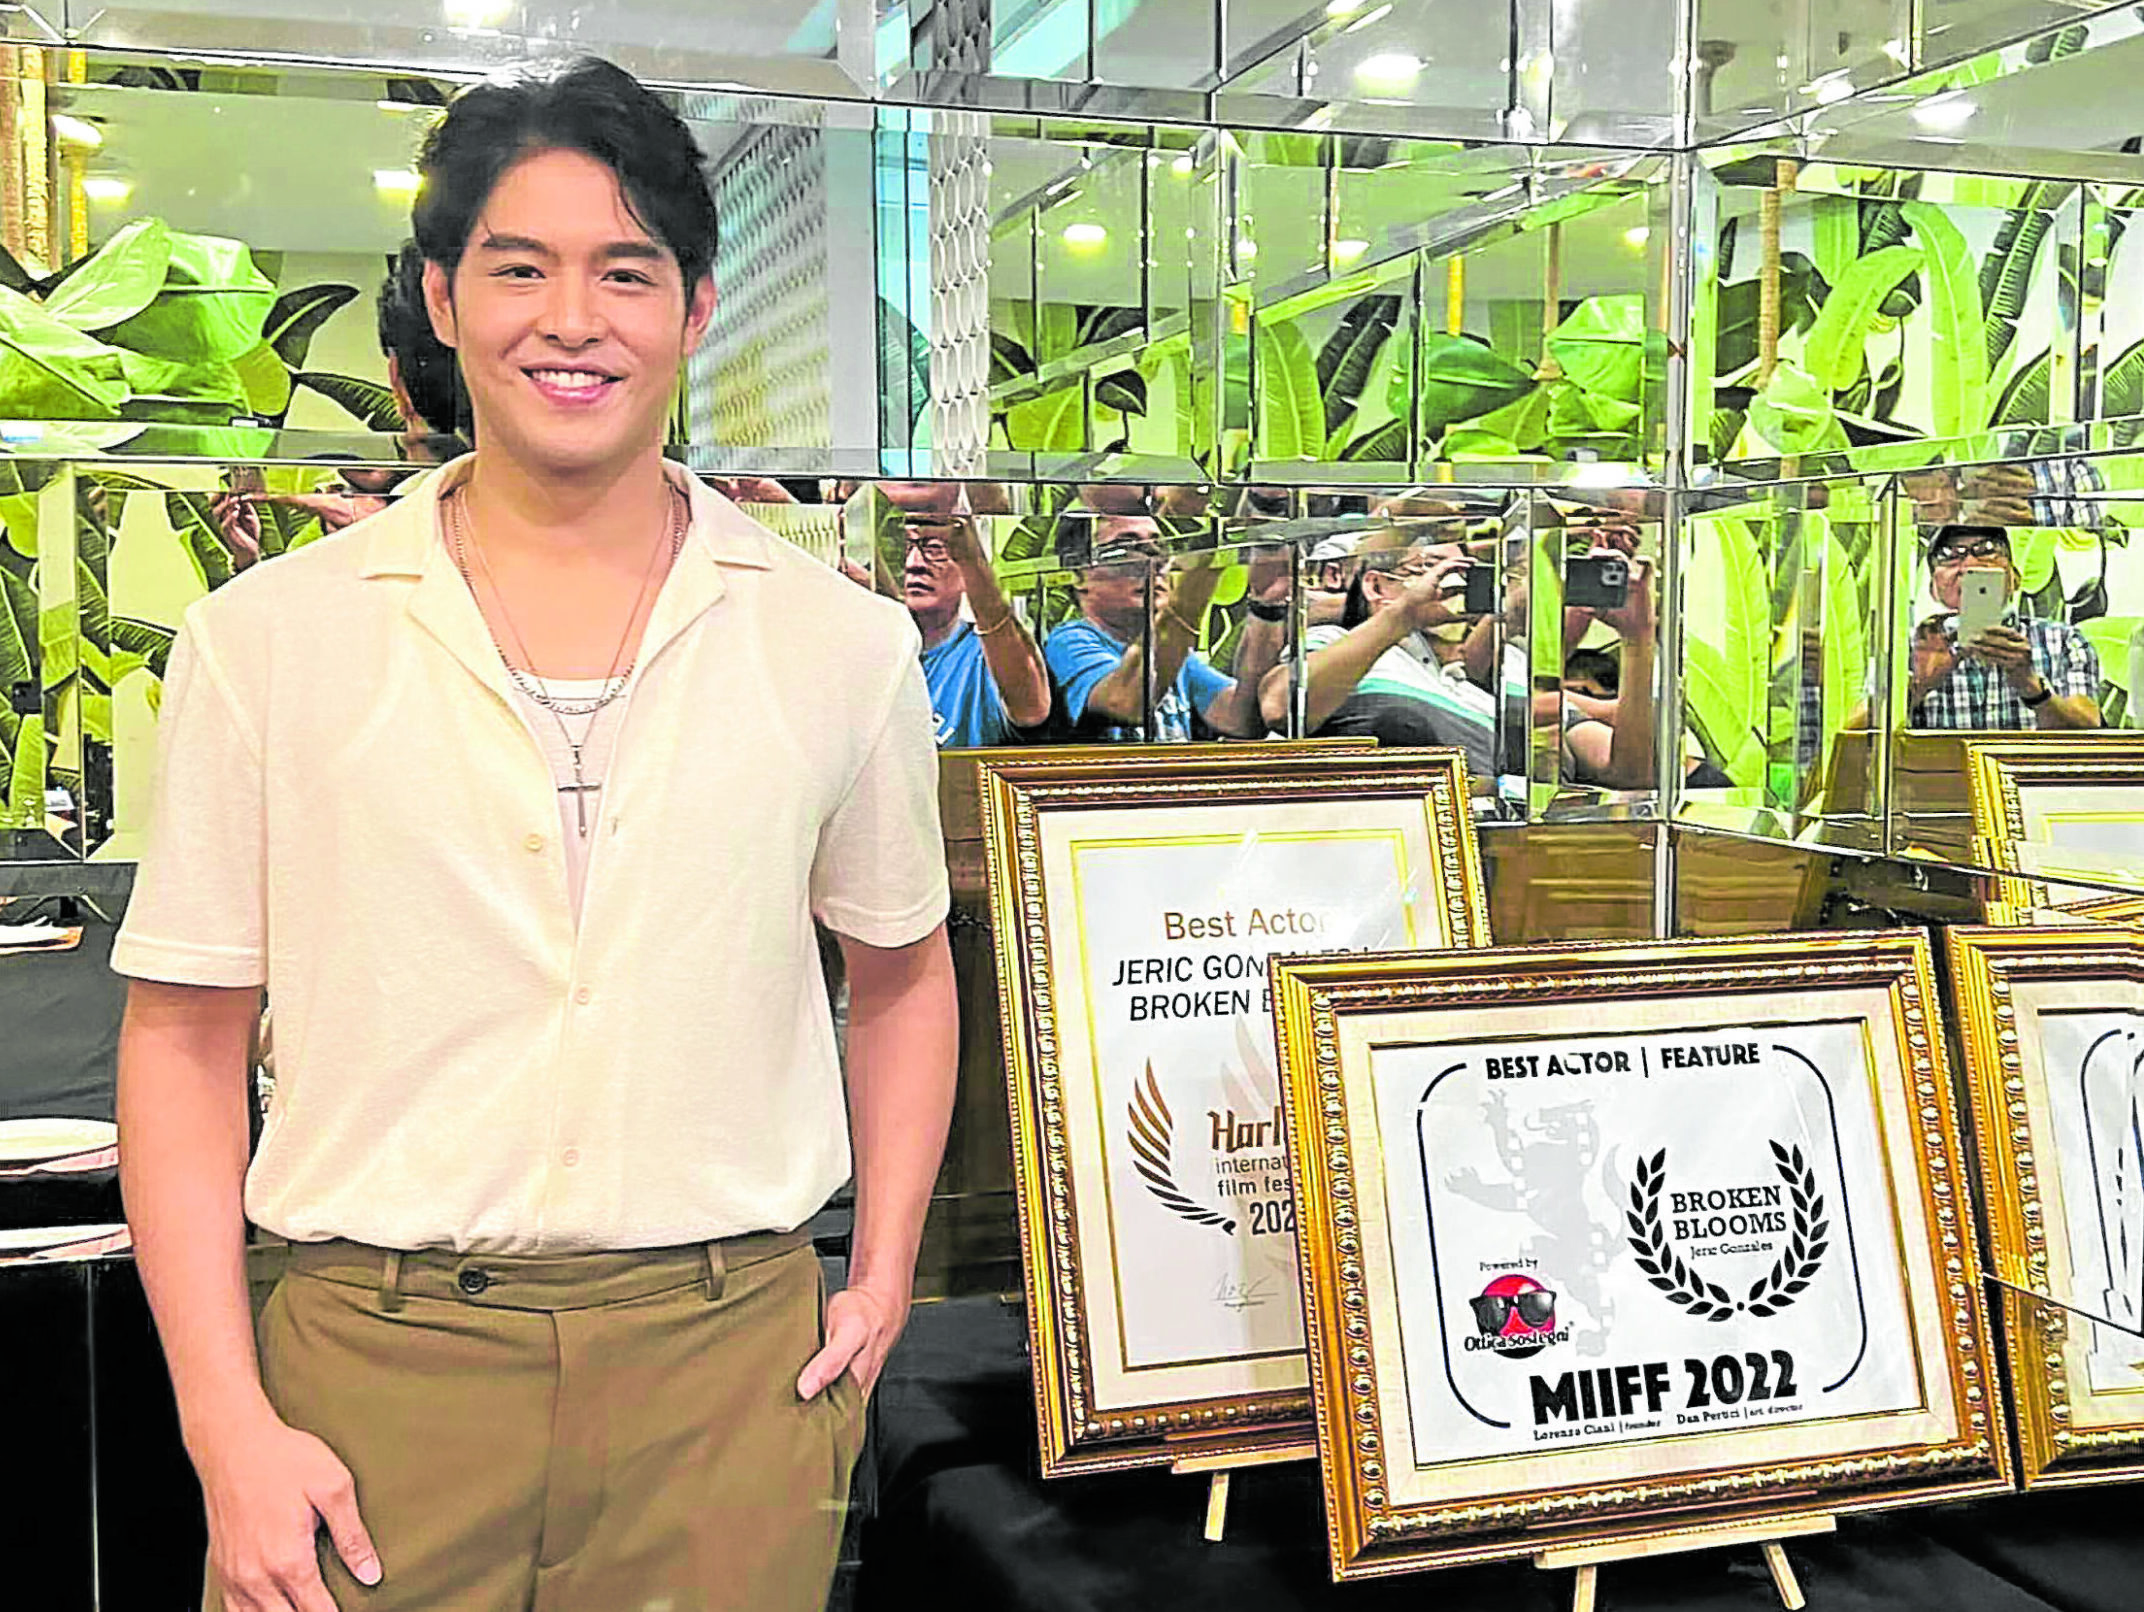 Jeric Gonzales poses with his citations.